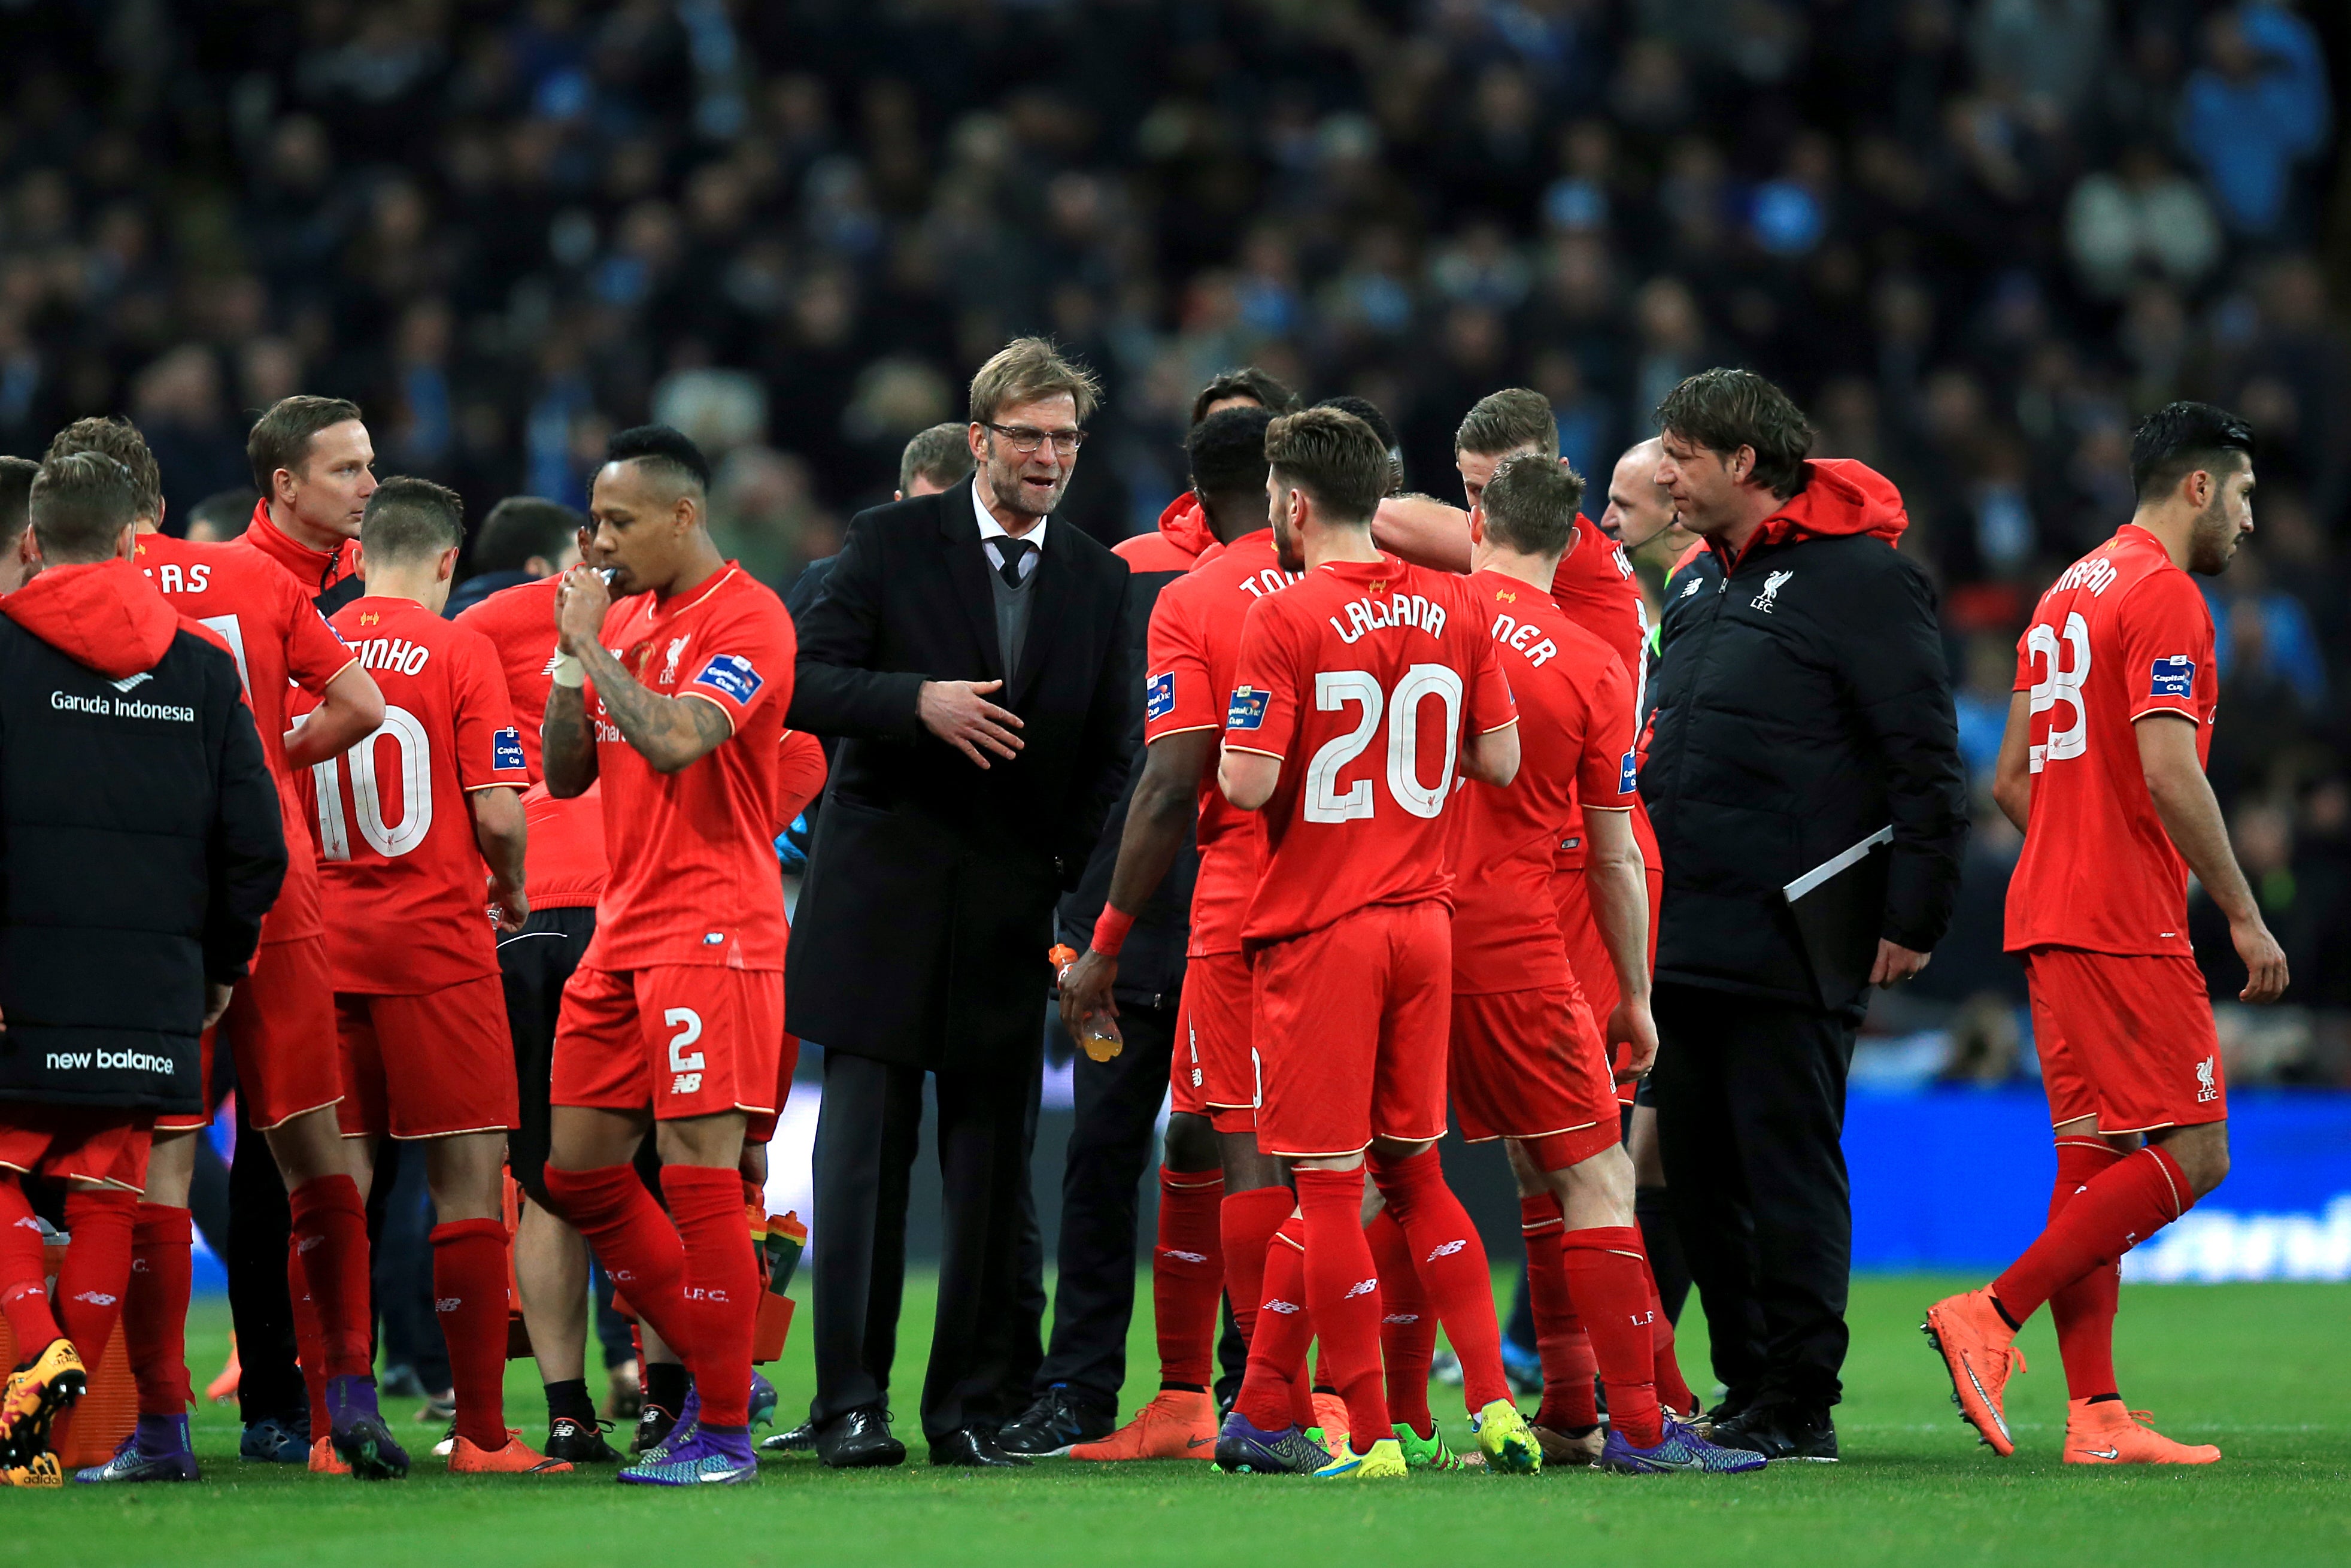 Liverpool manager Jurgen Klopp will not be wearing a suit to the League Cup final again (Mike Egerton/PA)